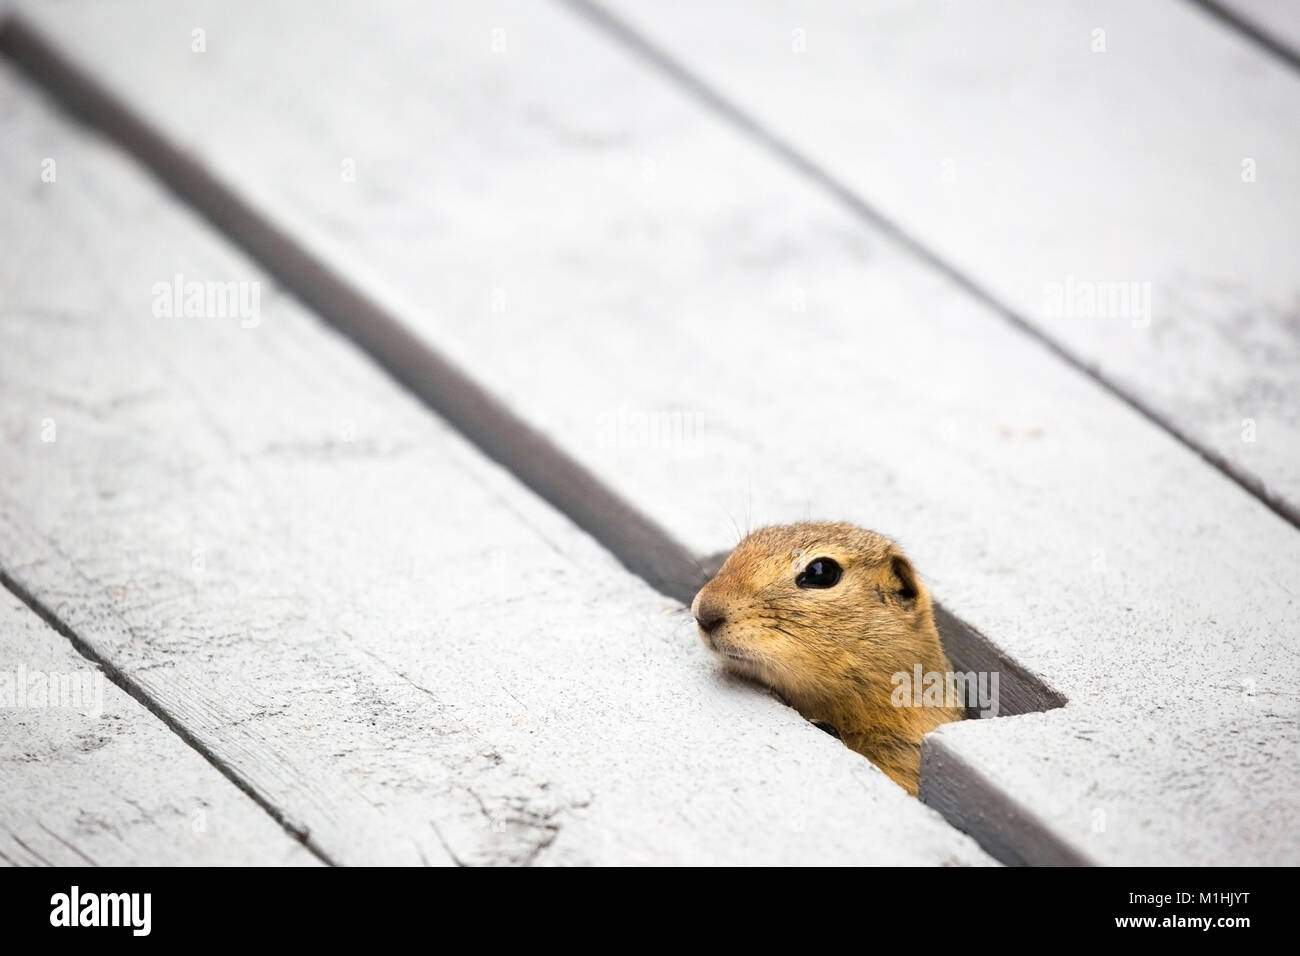 Richardson's ground squirrel (Urocitellus richardsonii) with face peeking up through opening in wood porch, Canada Stock Photo